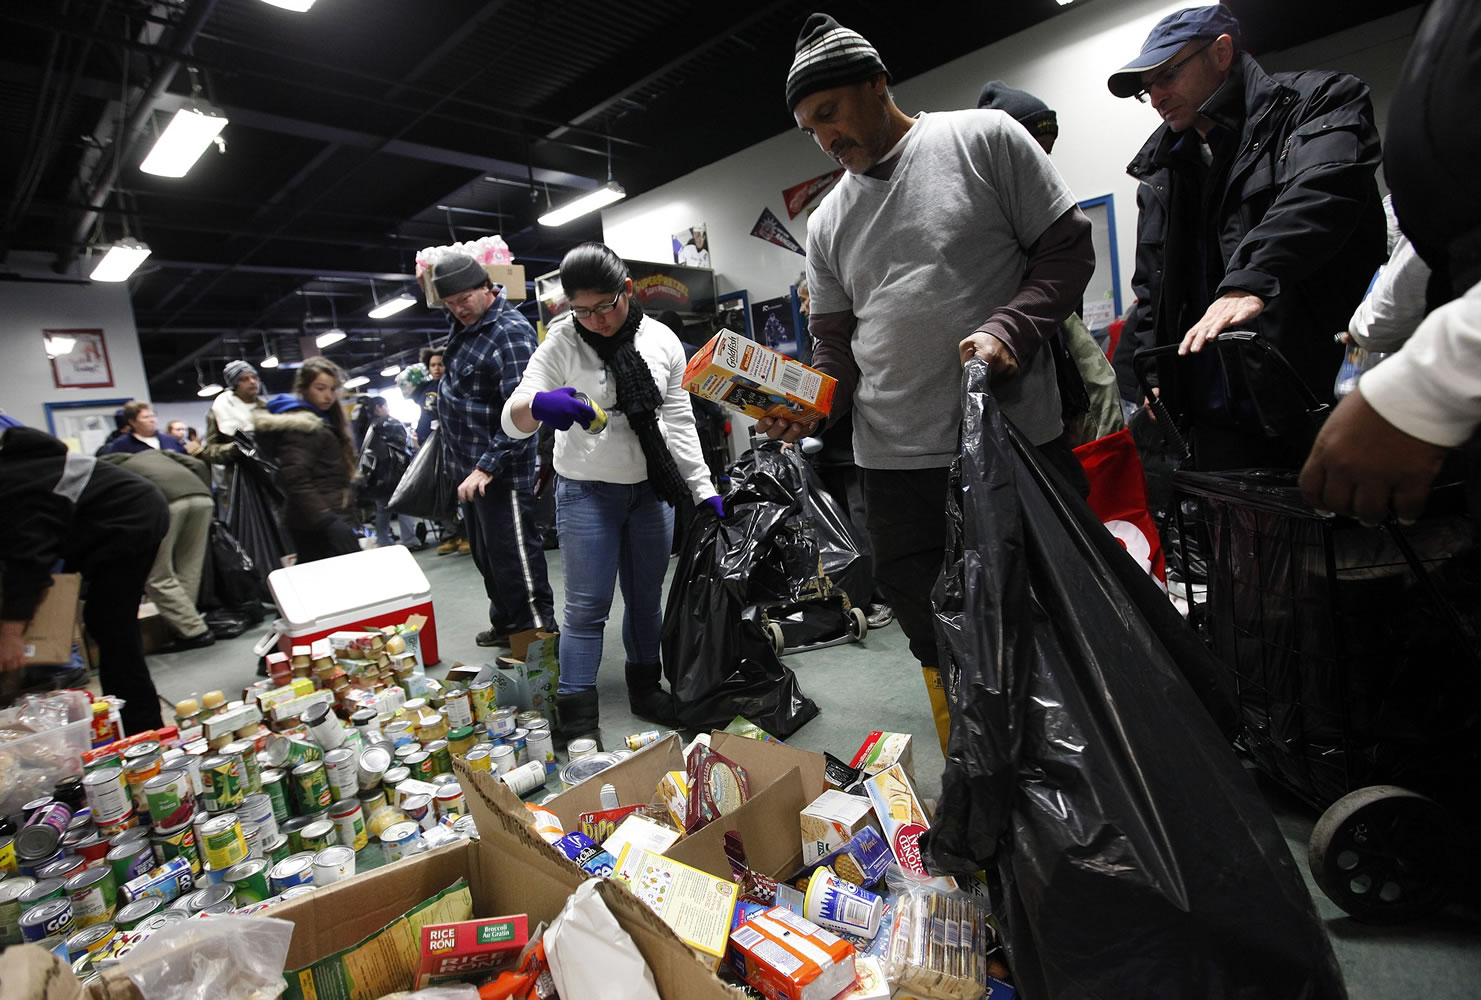 Storm victims browse through donated food items in November 2012 at a clothing and food distribution center in Long Beach, N.Y.